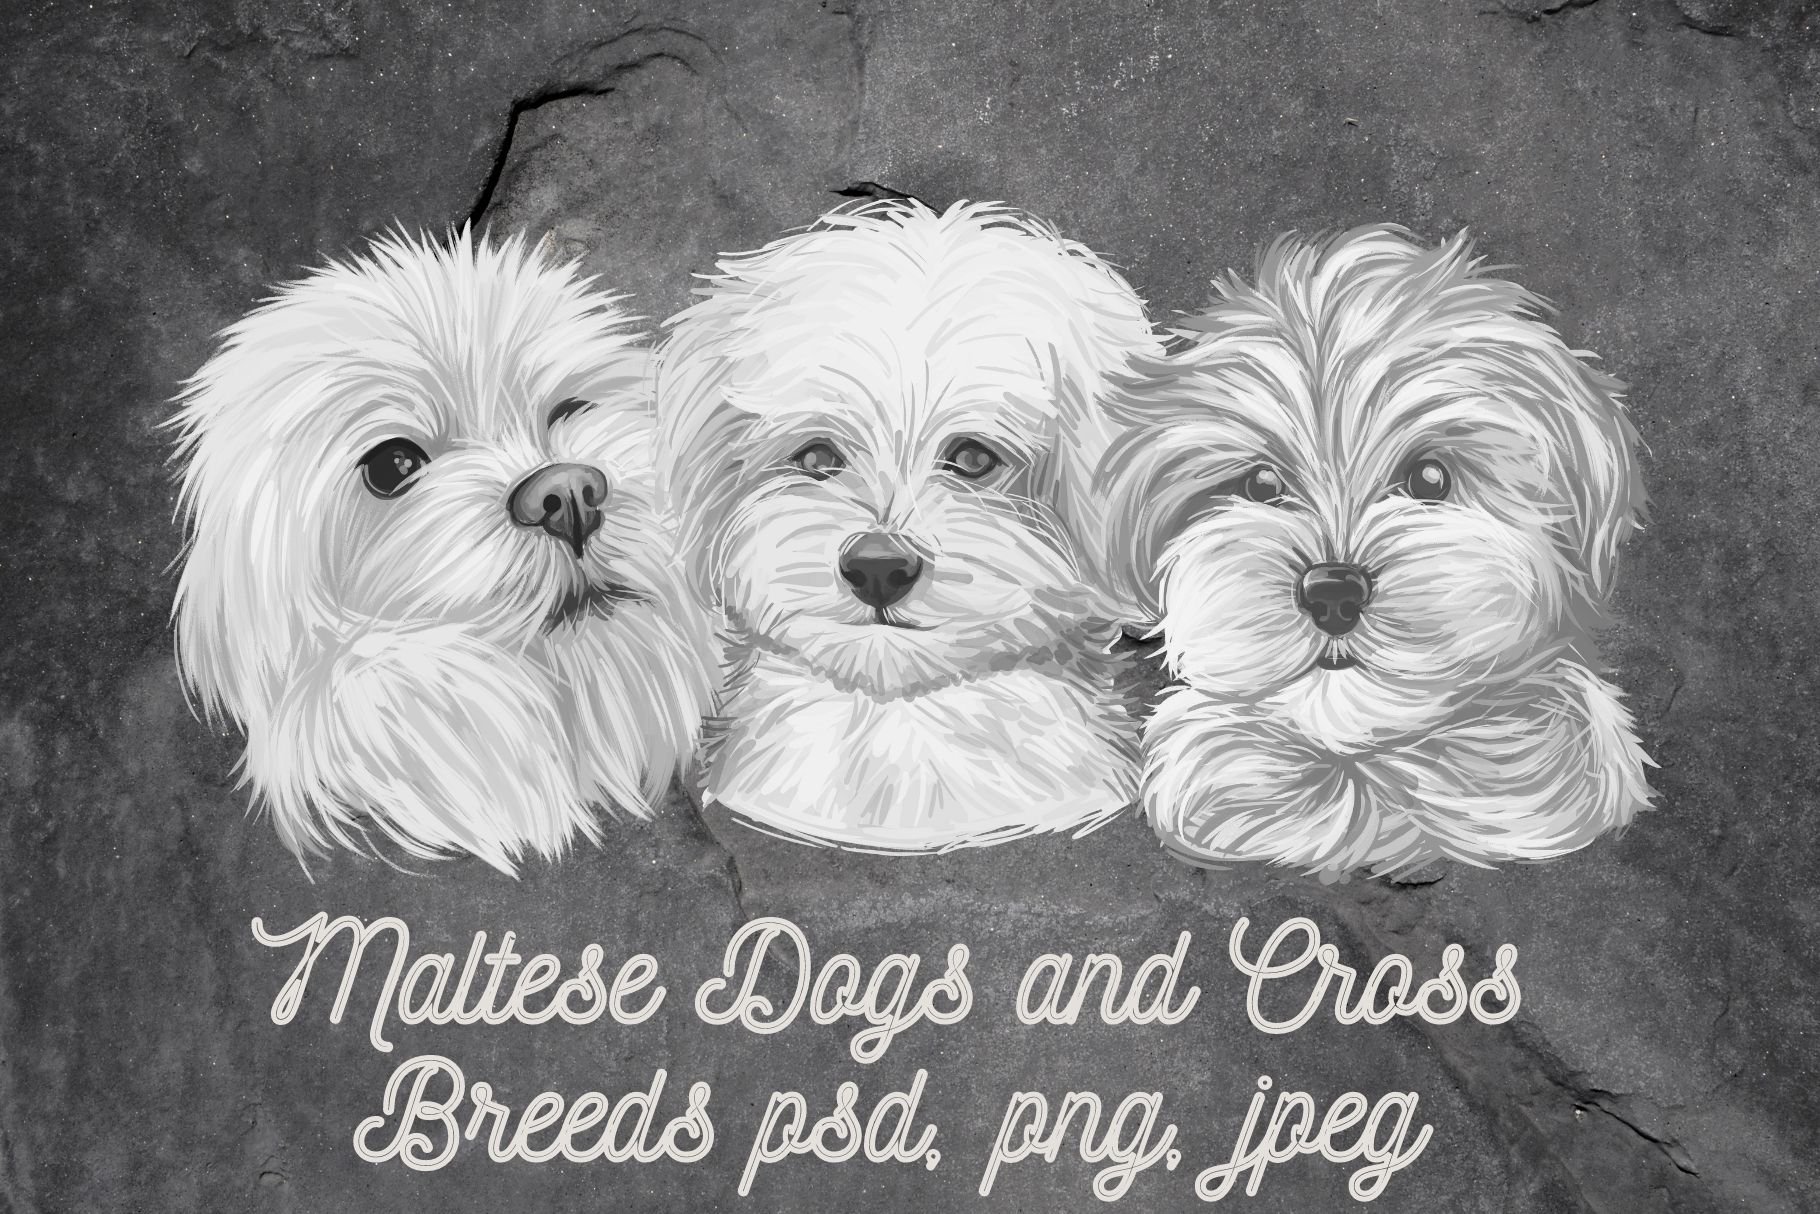 Maltese Dogs  Cross Breeds PSD, PNG cover image.